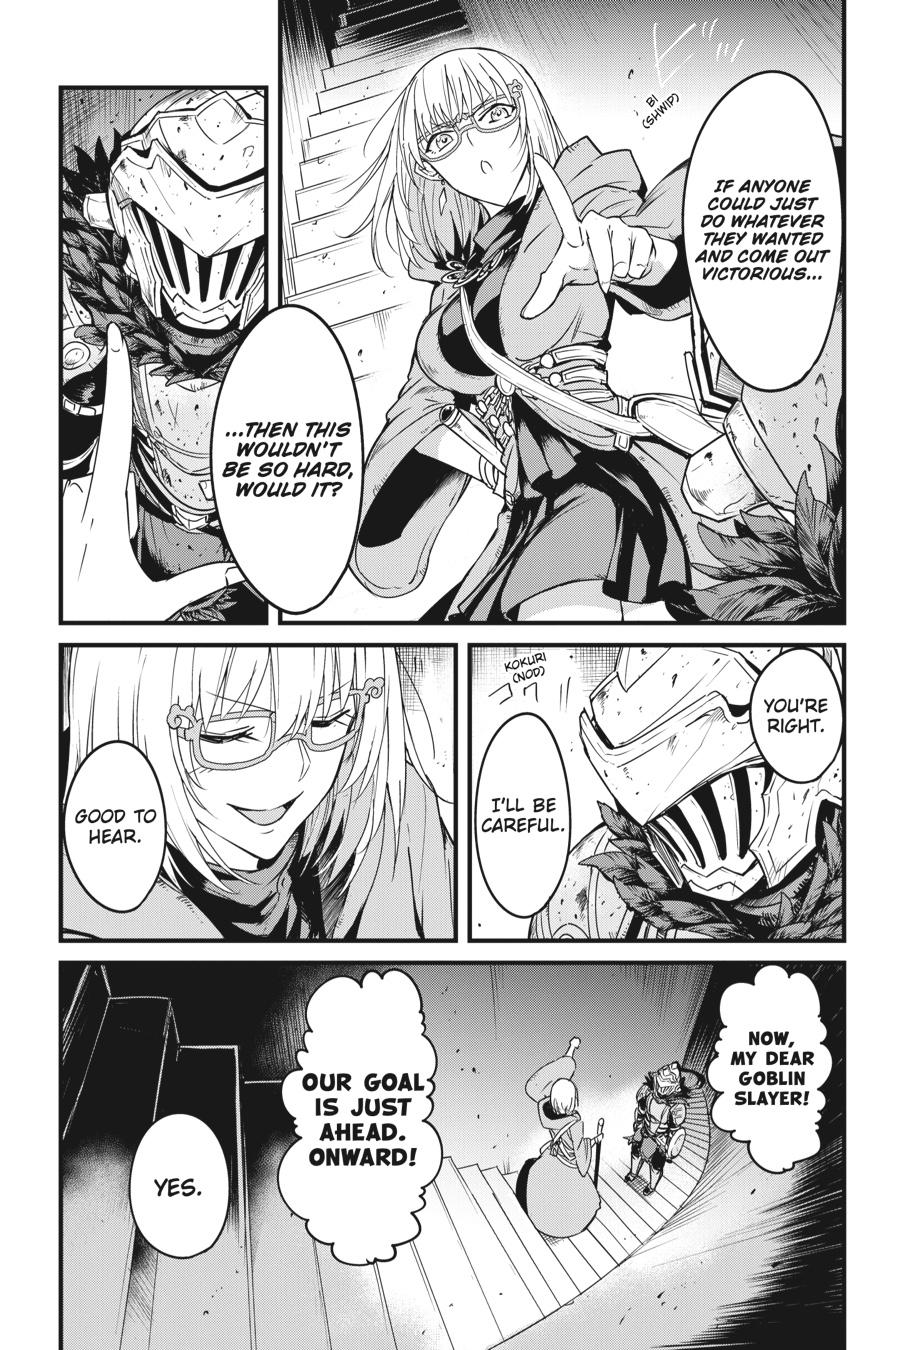 Goblin Slayer: Side Story Year One chapter 42 page 4